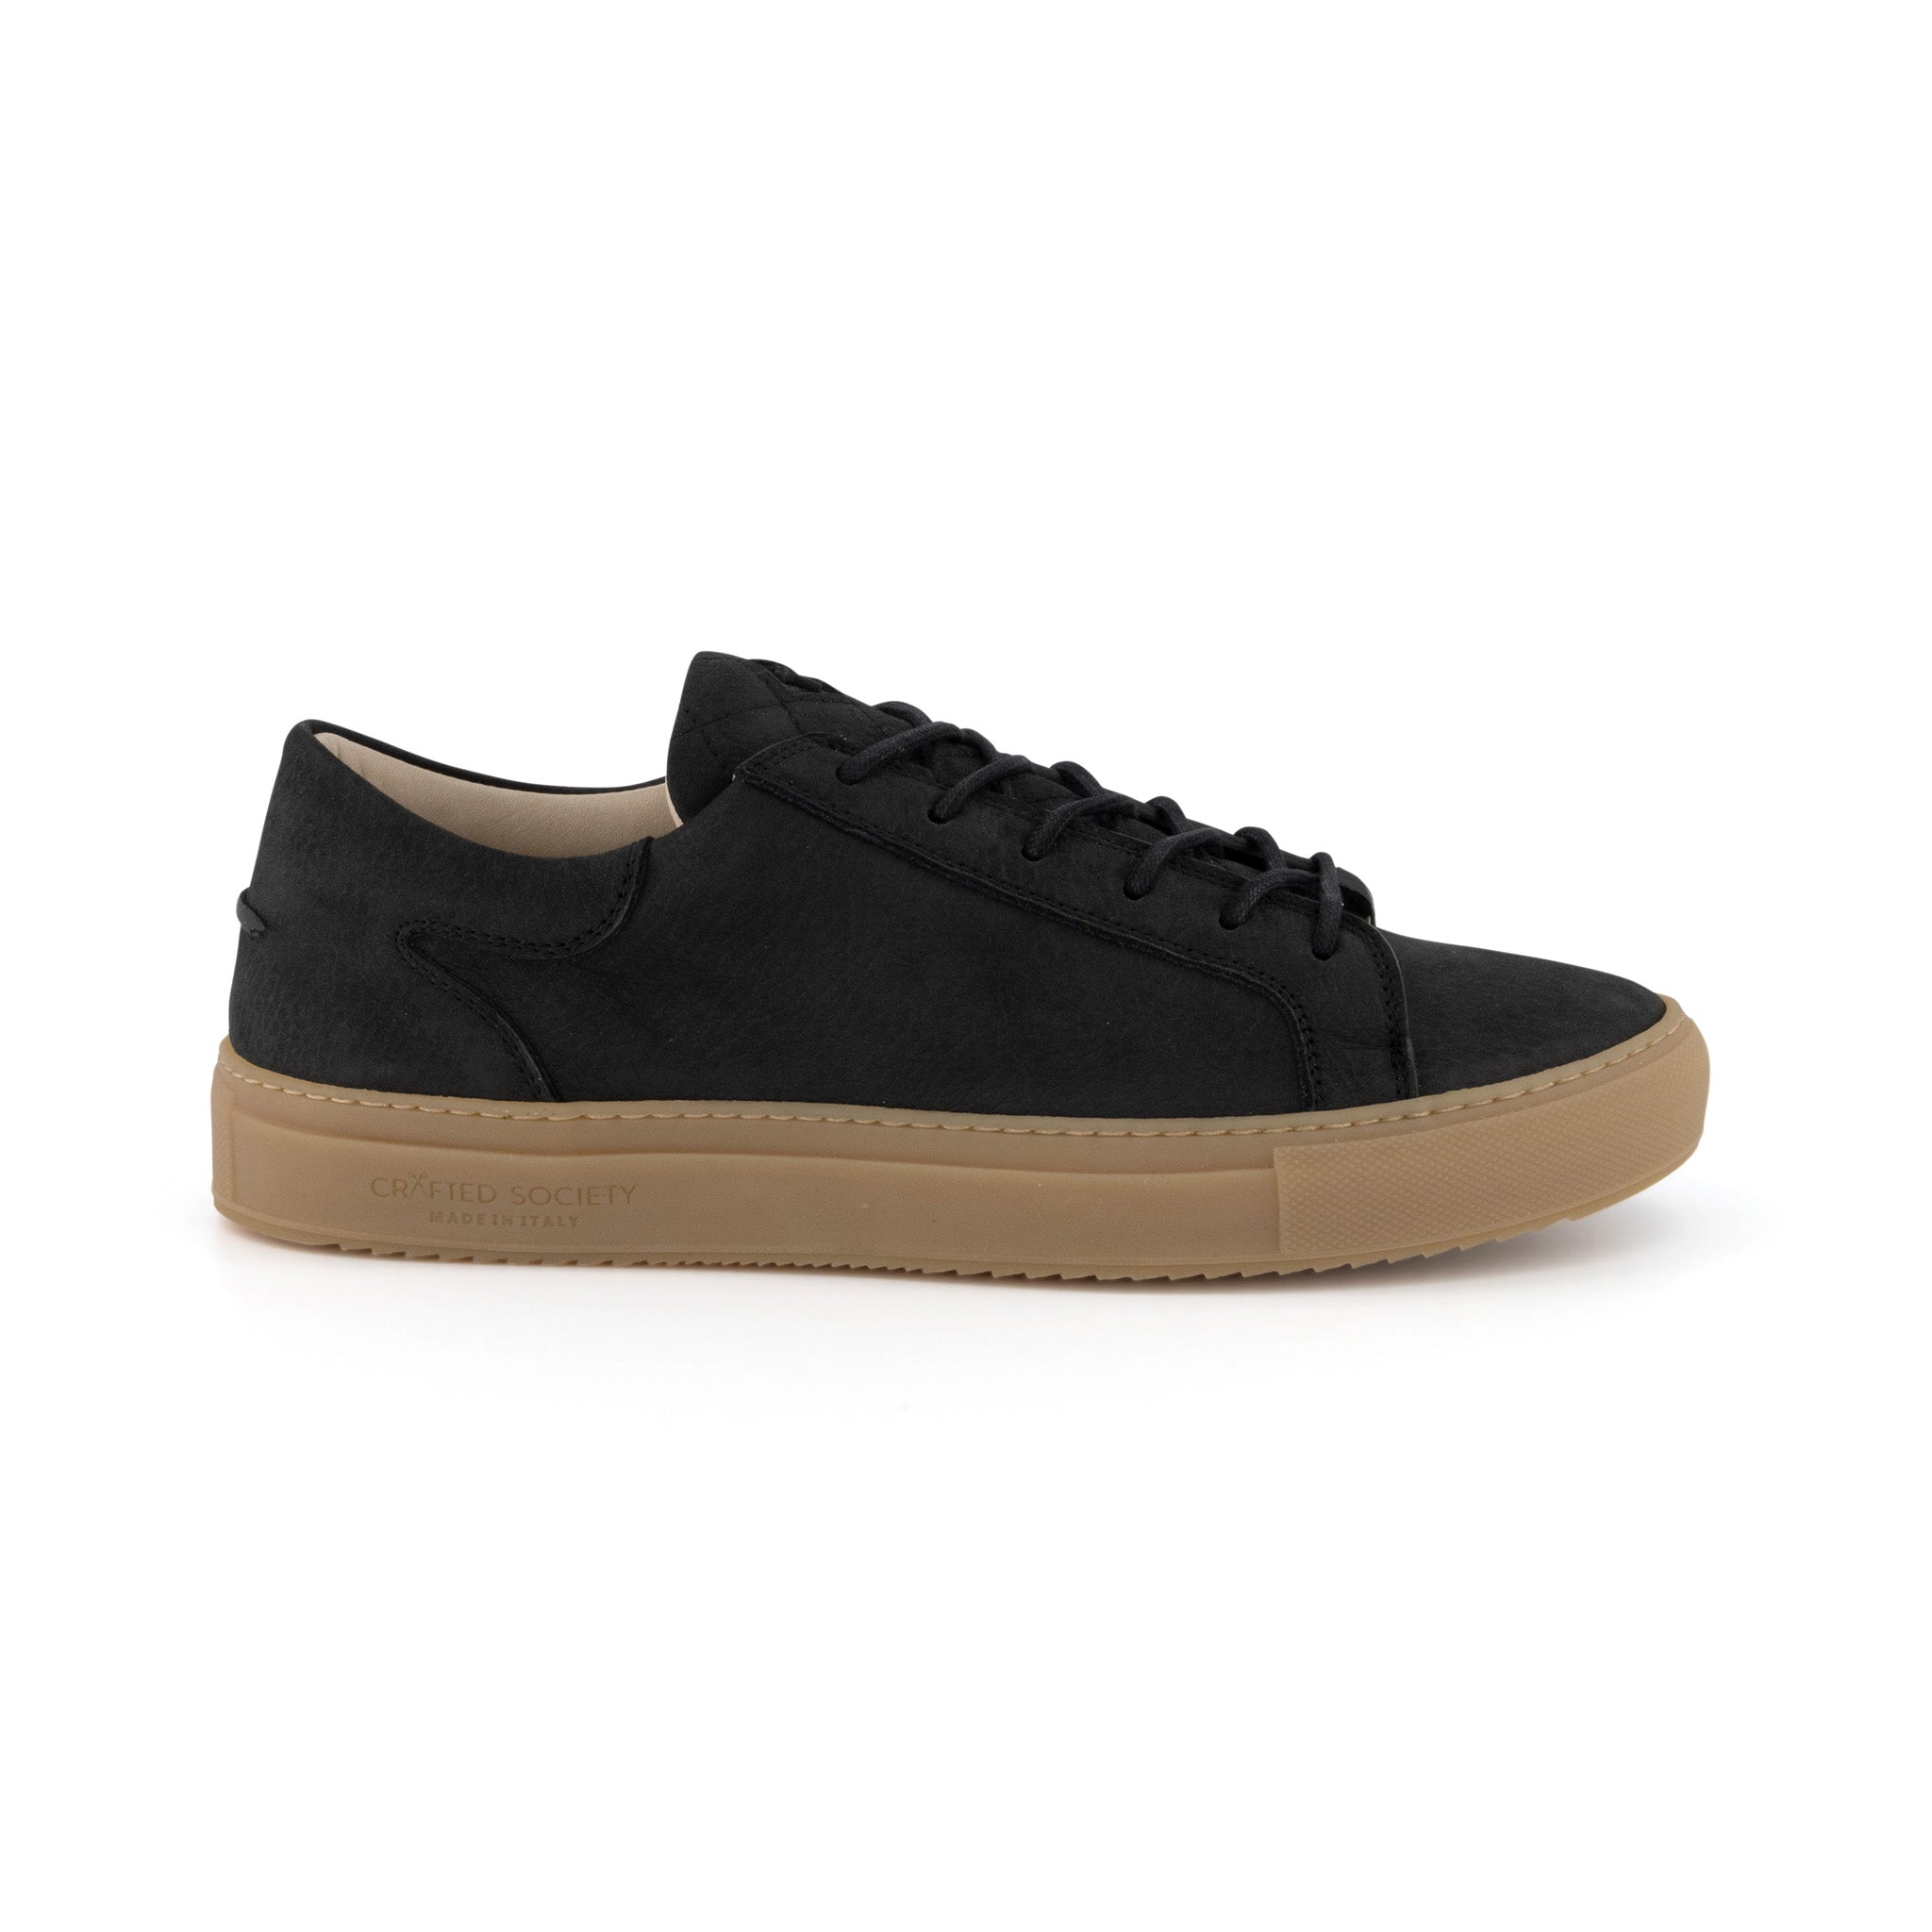 Mario Low Refined Sneaker | Black Nubuck | Gum Rubber Outsole | Made in Italy